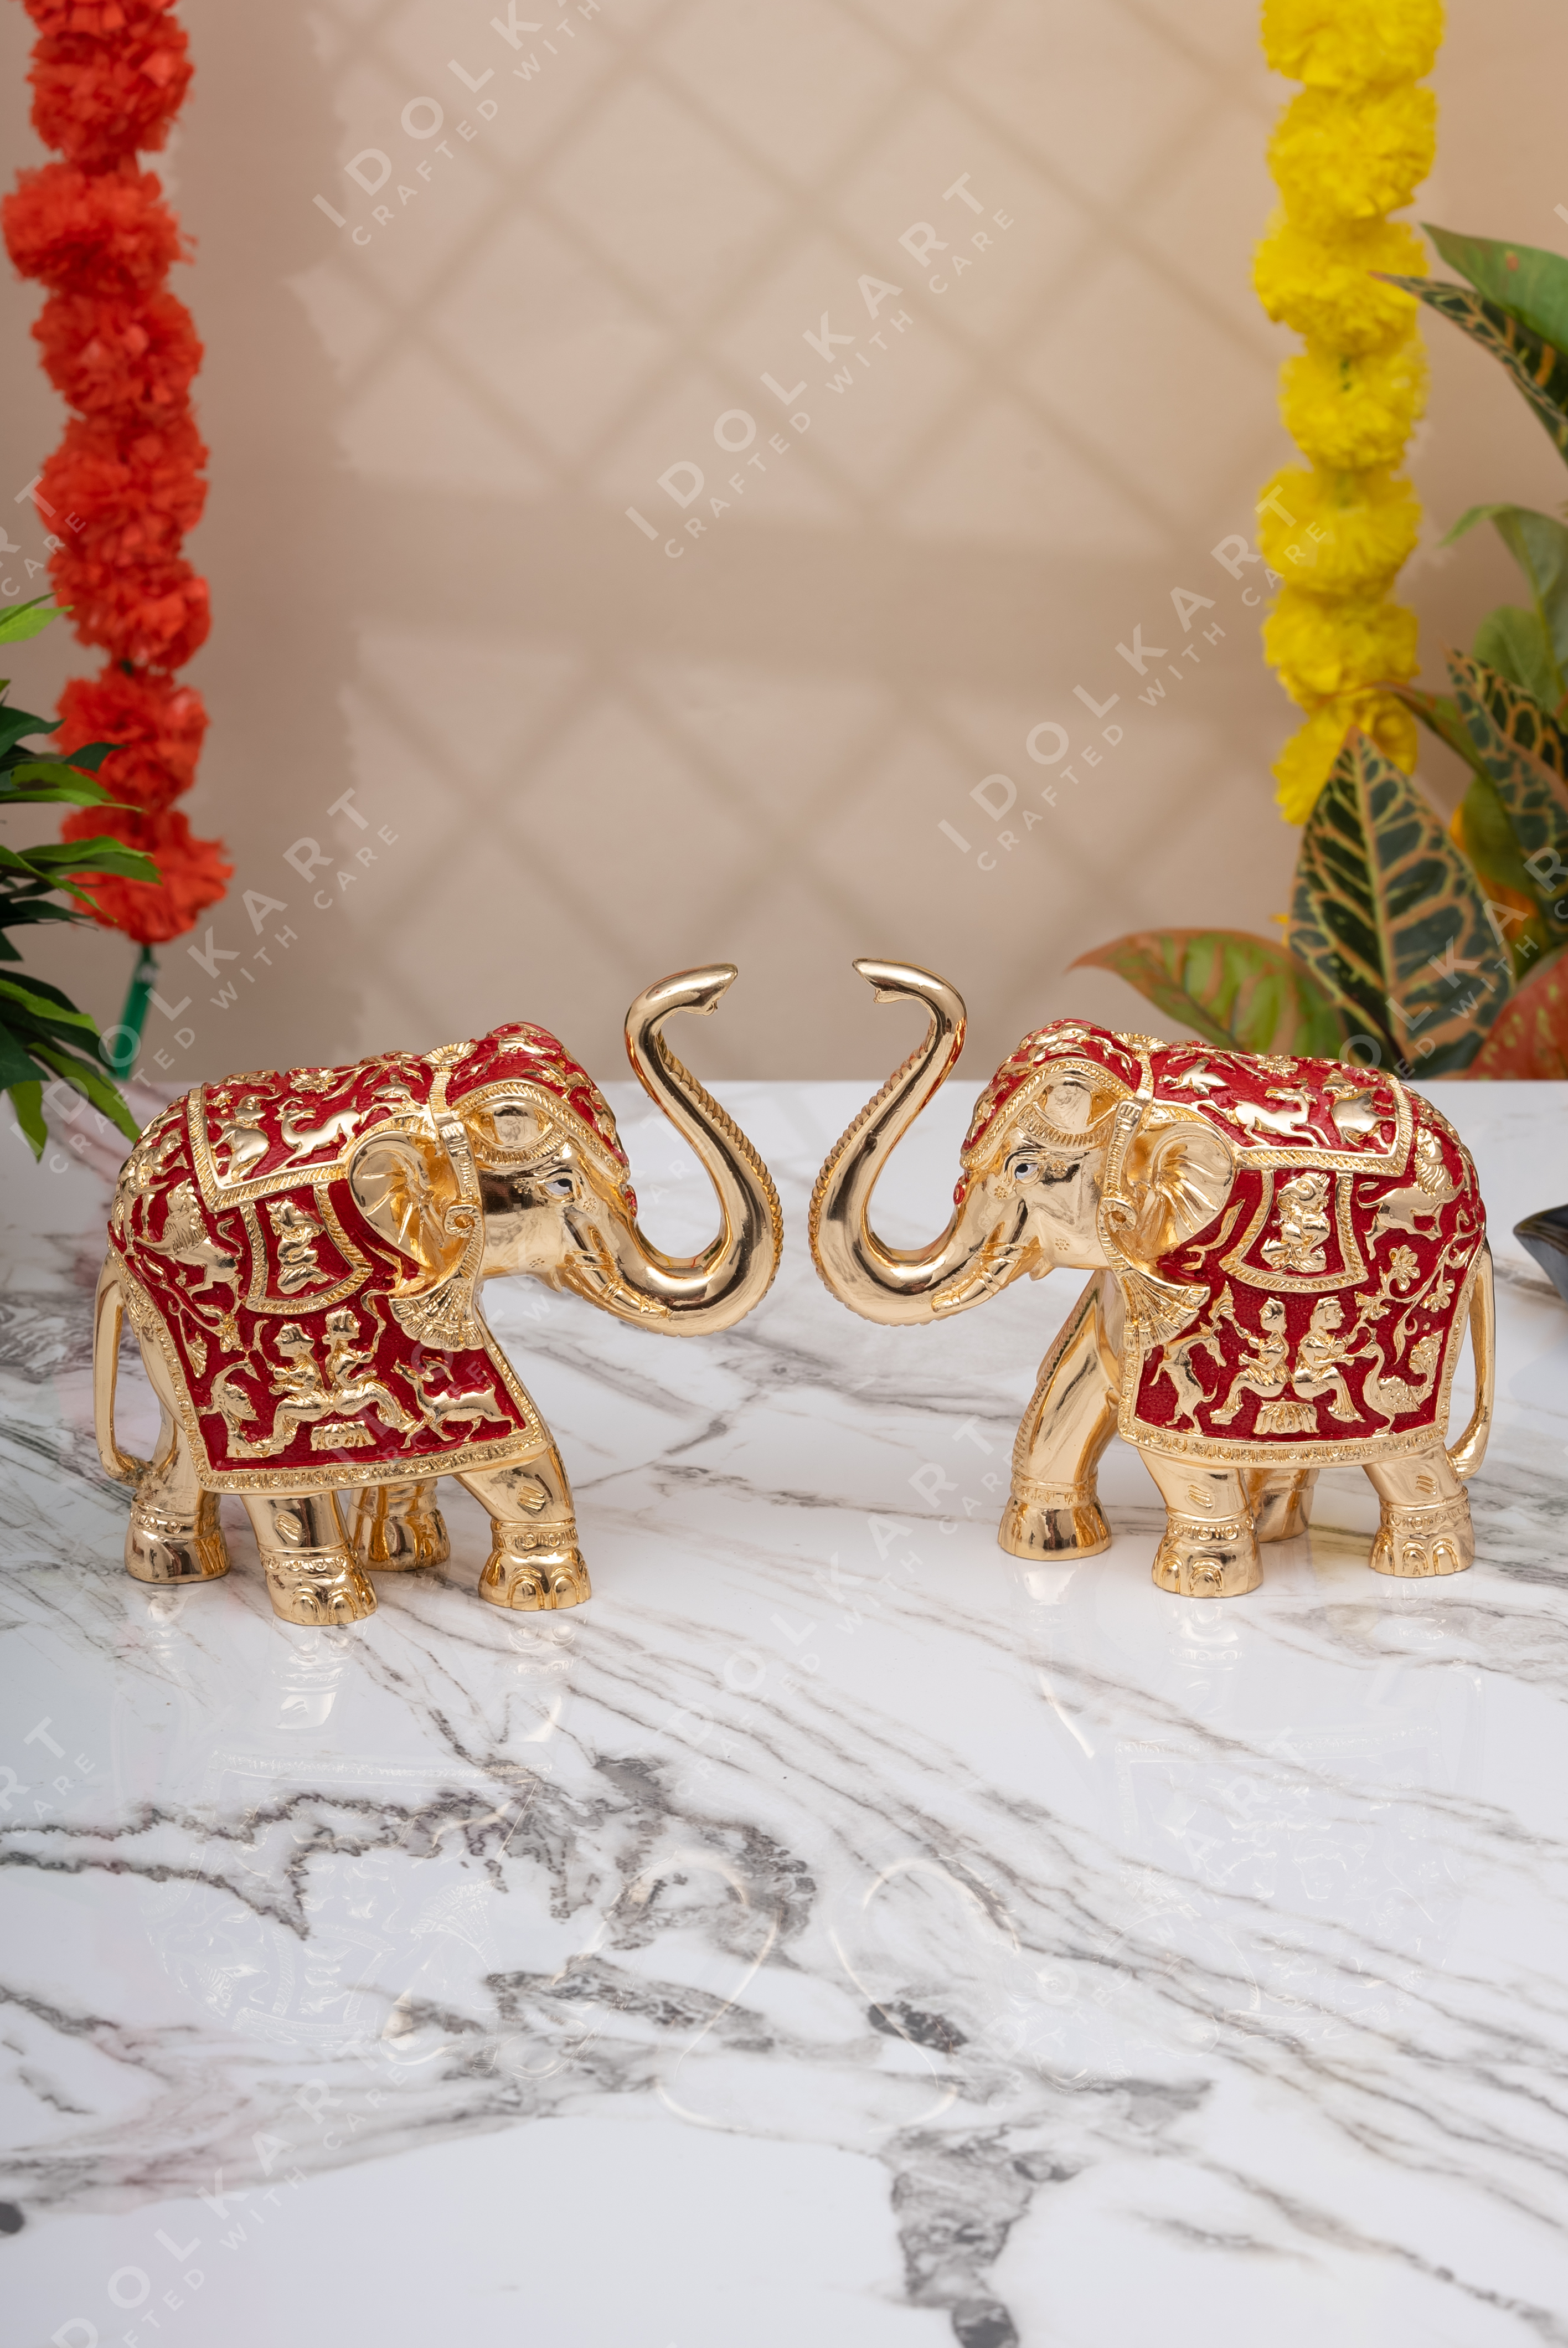 Products Pure Gold & Silver Coated Elephant Showpiece for Gifts Home D